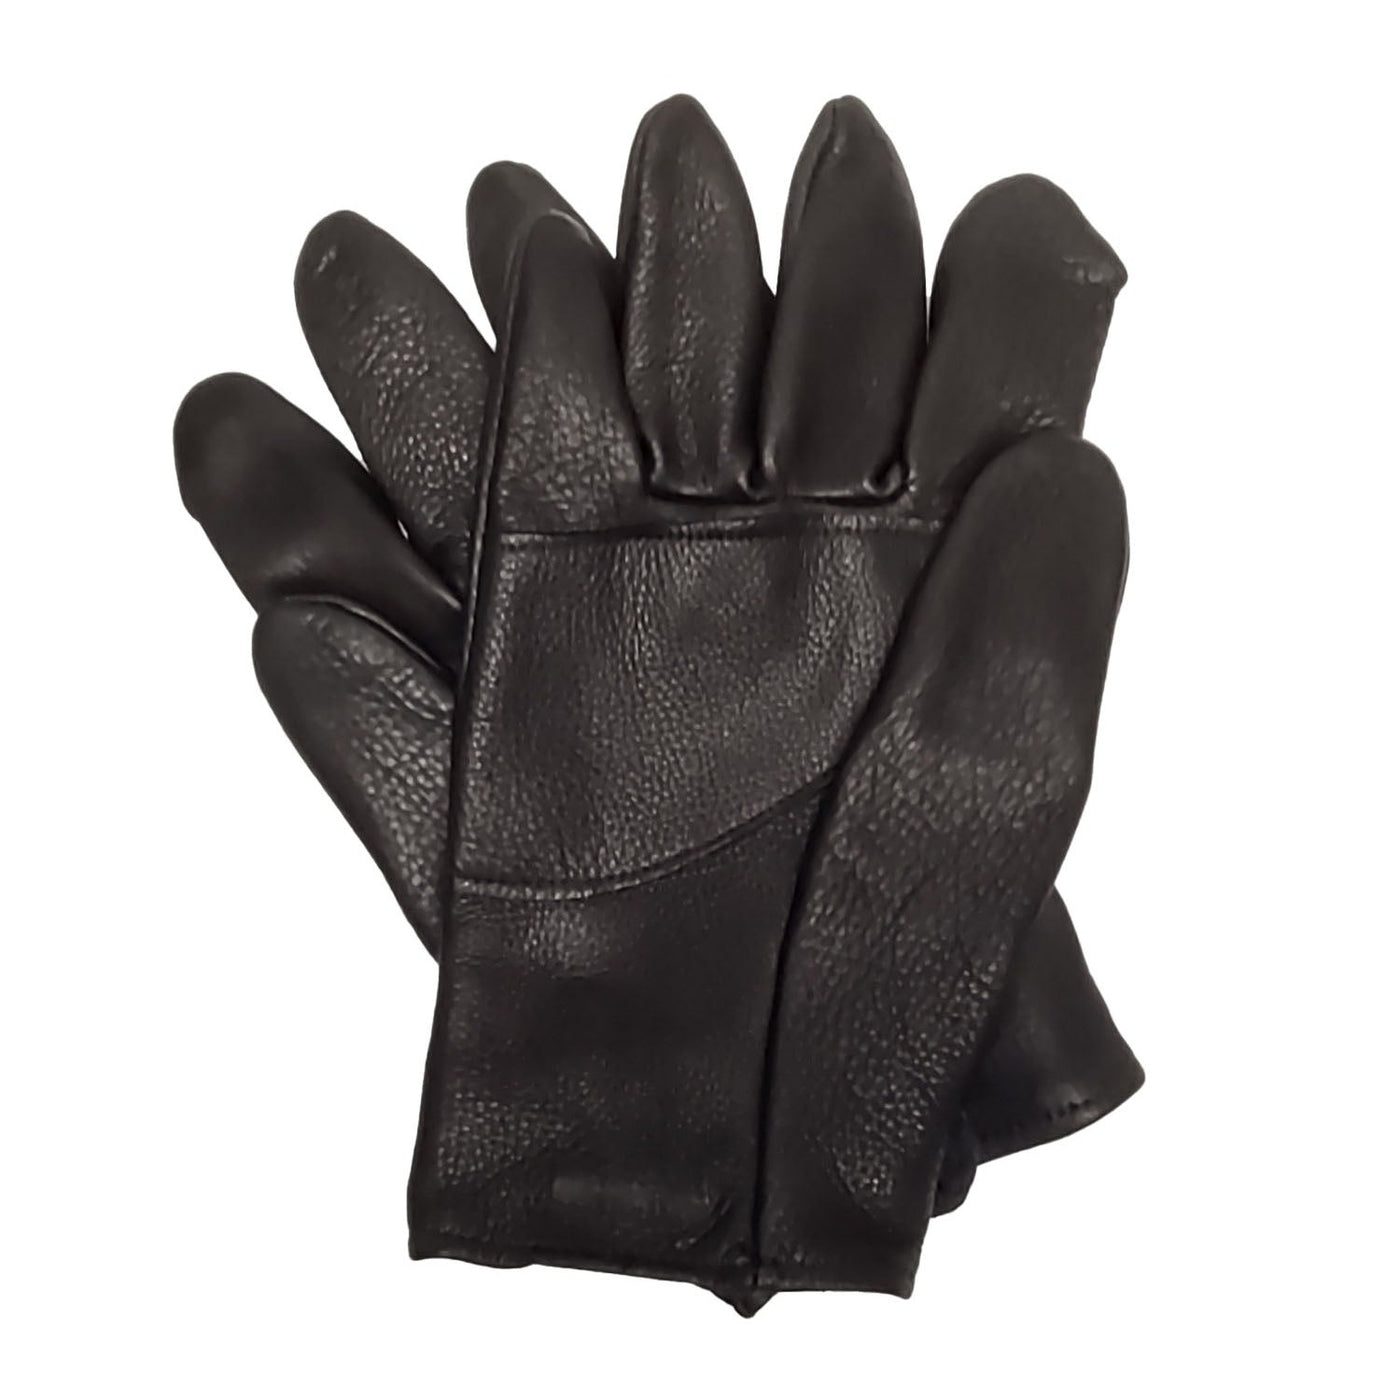 Combo glove set; deerskin with reinforced palm